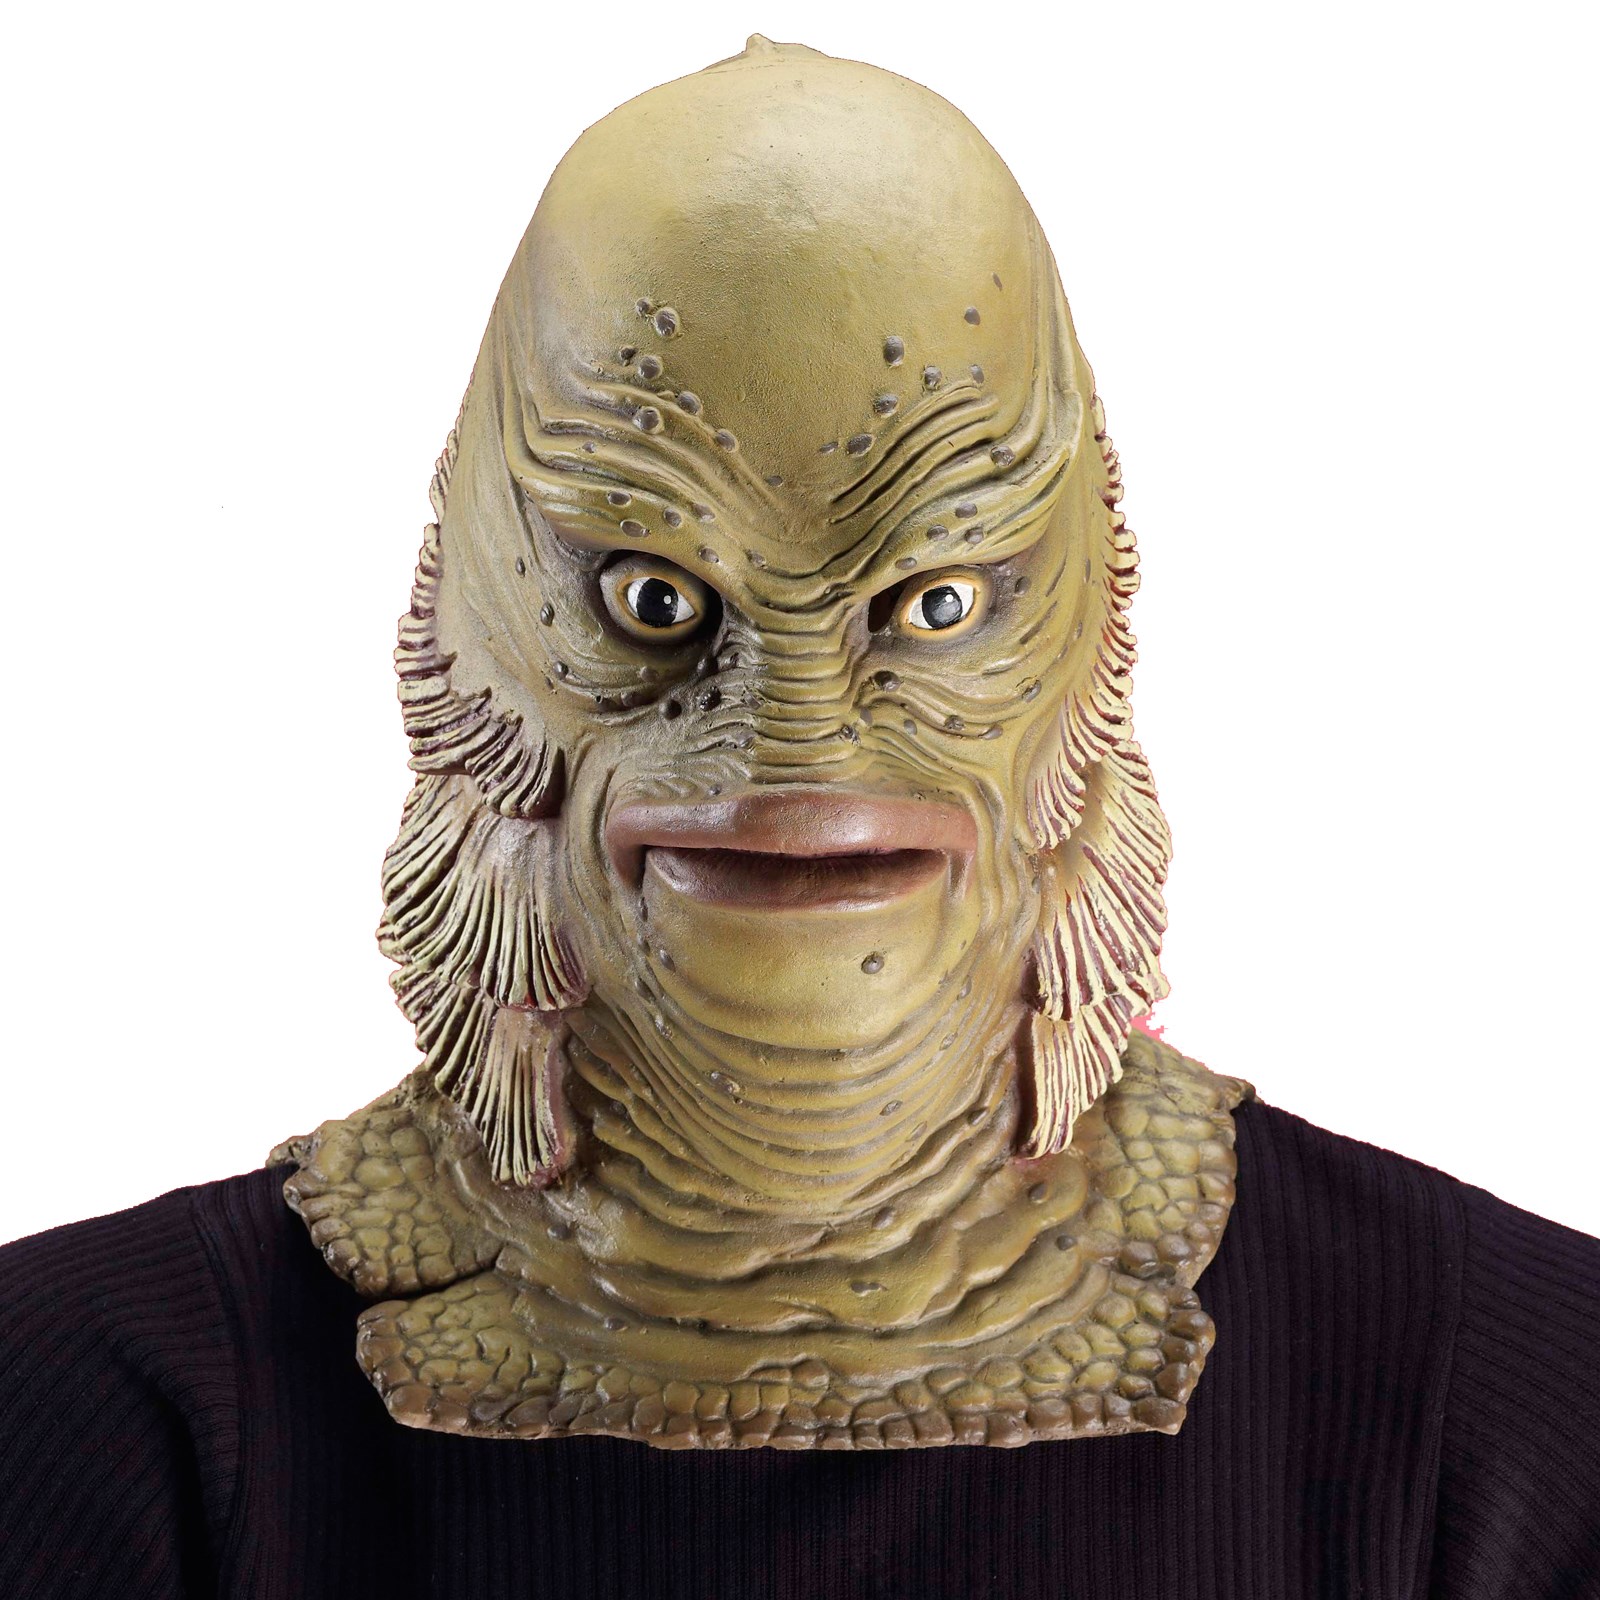 Universal Monster Collectors Edition Creature from the Black Lagoon Adult Mask